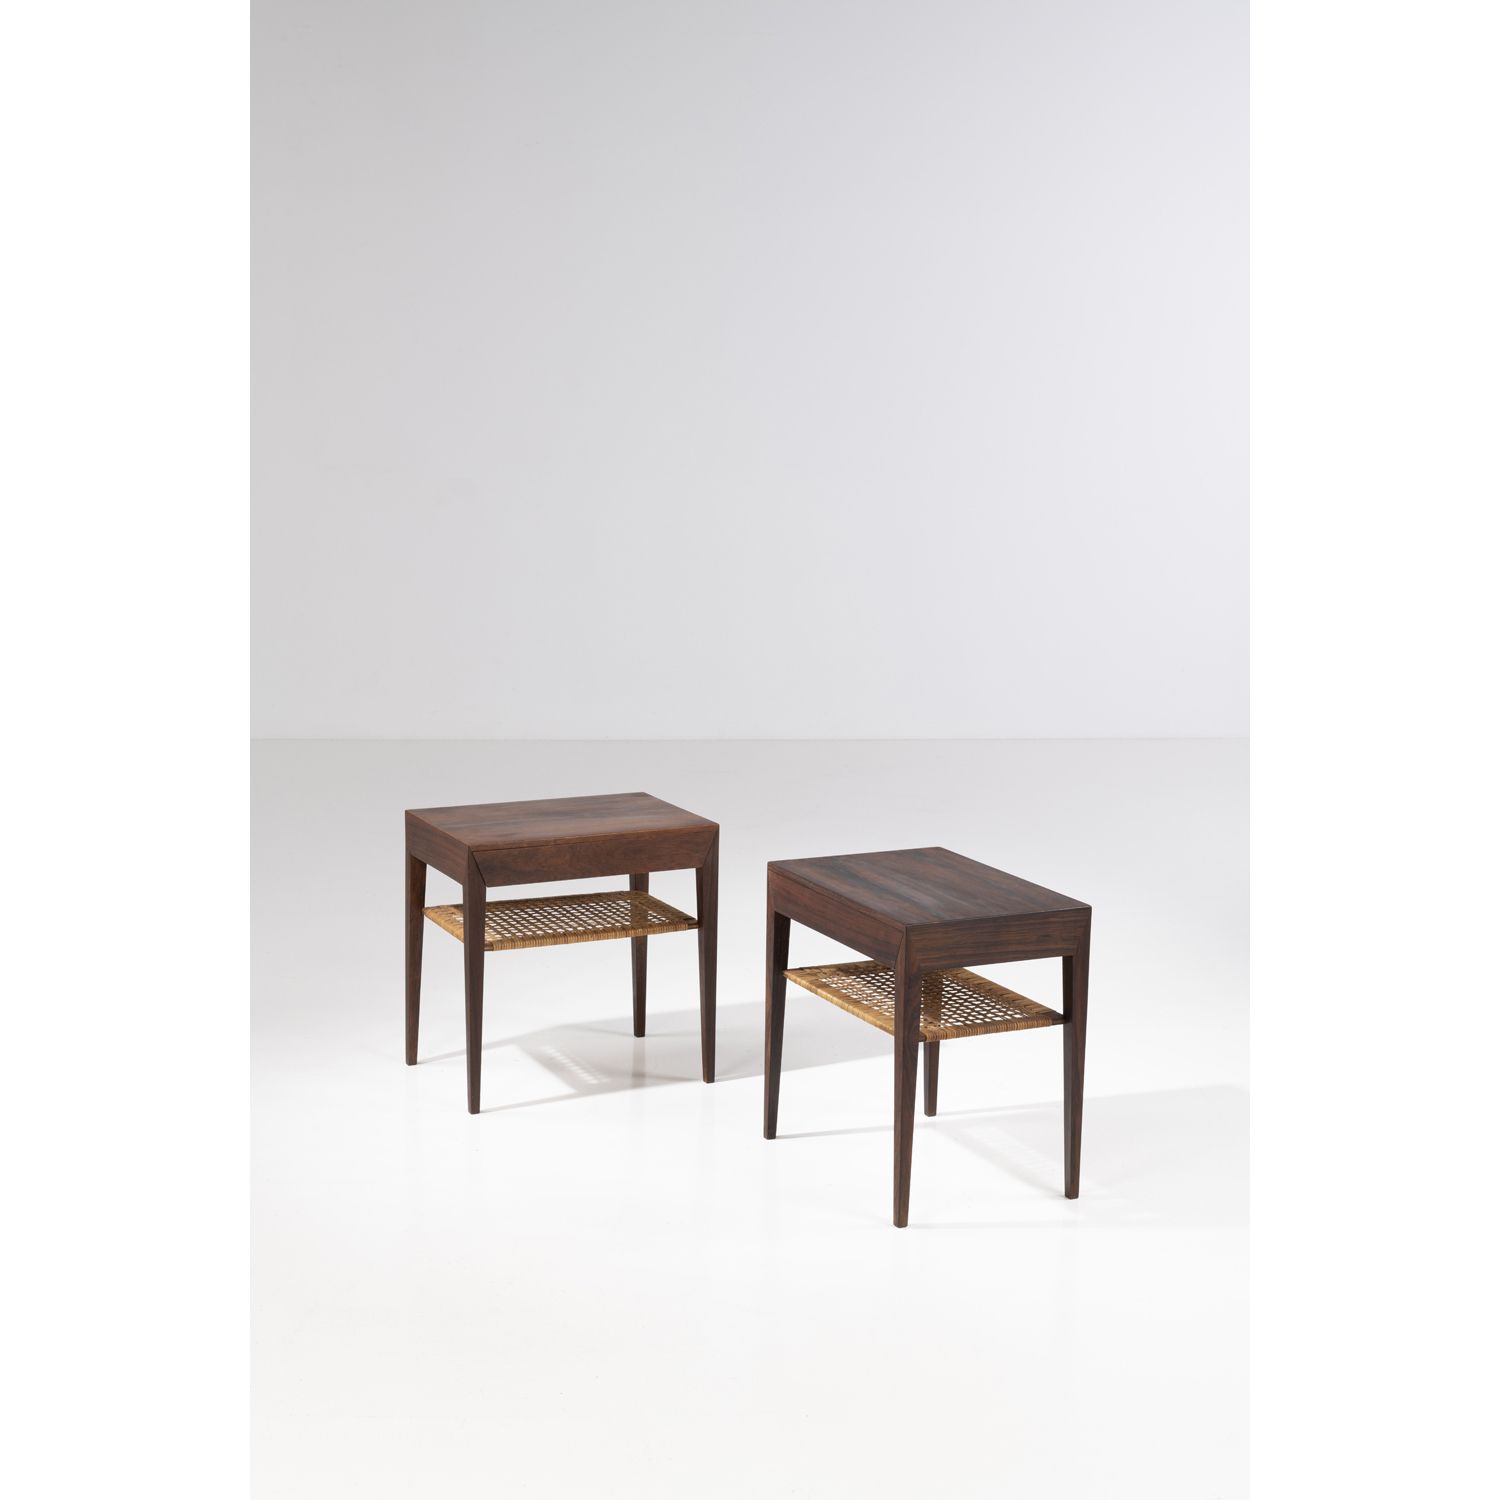 Null Severin Hansen (1887-1964)

Pair of side tables

Rosewood and caning

Edite&hellip;